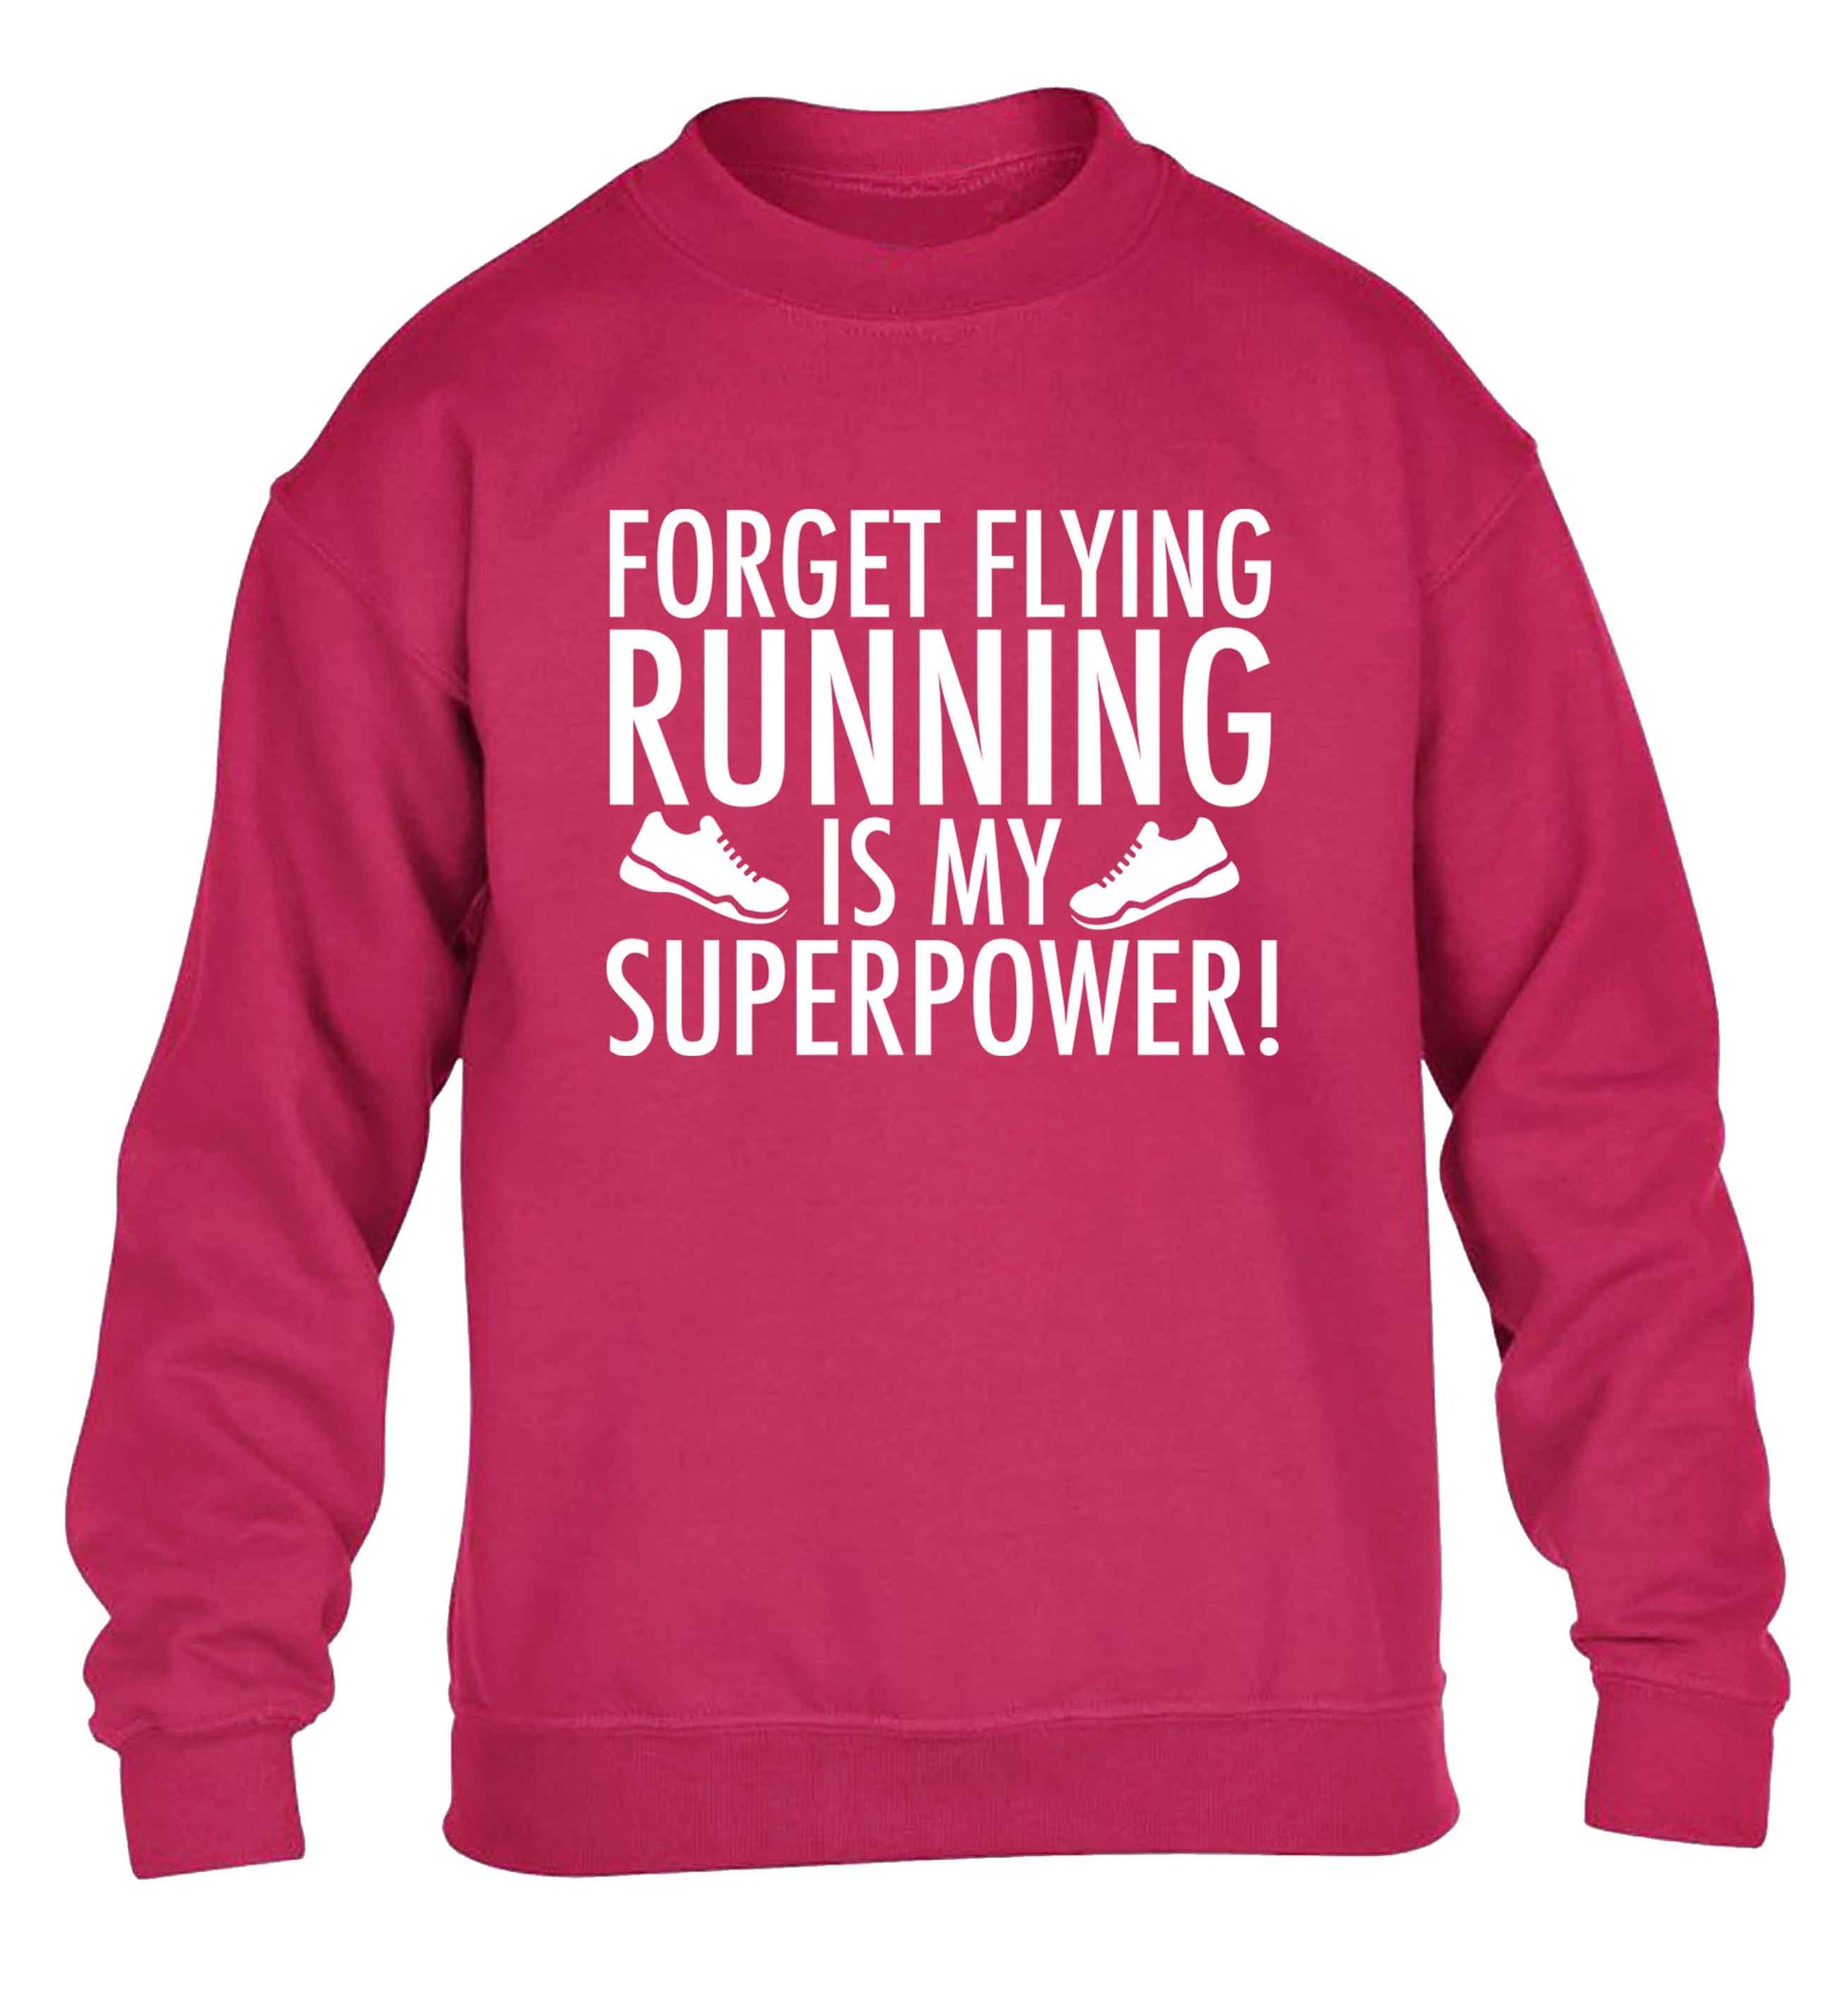 Forget flying running is my superpower children's pink sweater 12-13 Years